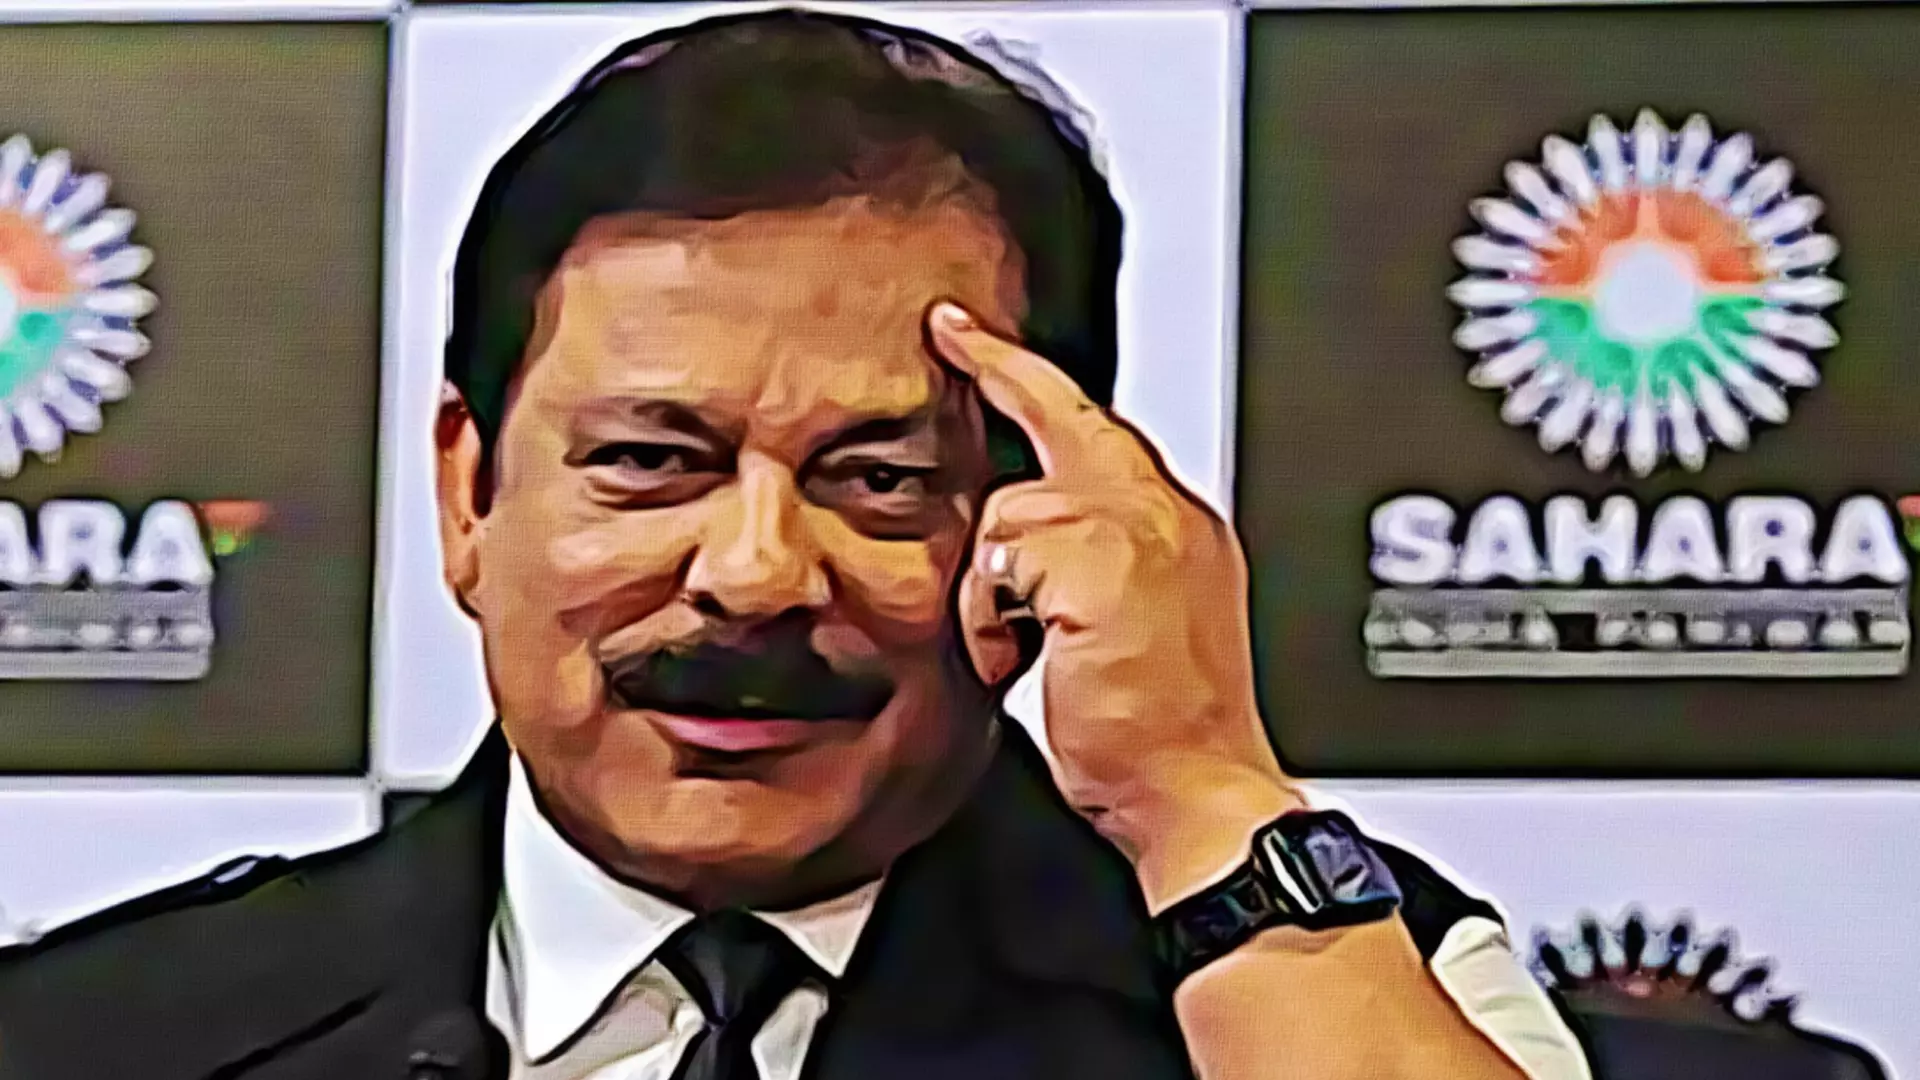 Subrata Roy led a colourful life of camouflage and deceit